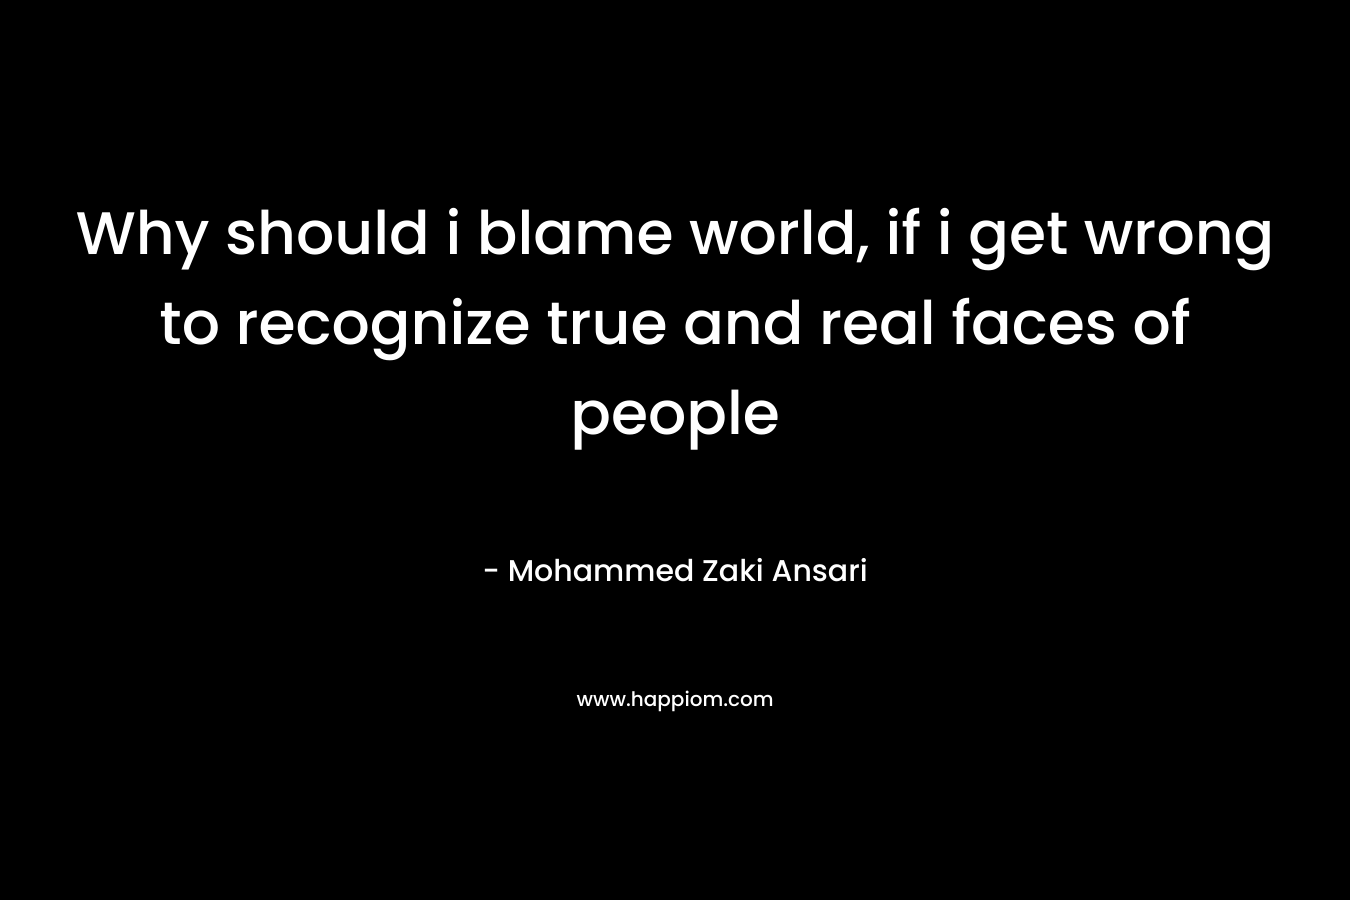 Why should i blame world, if i get wrong to recognize true and real faces of people